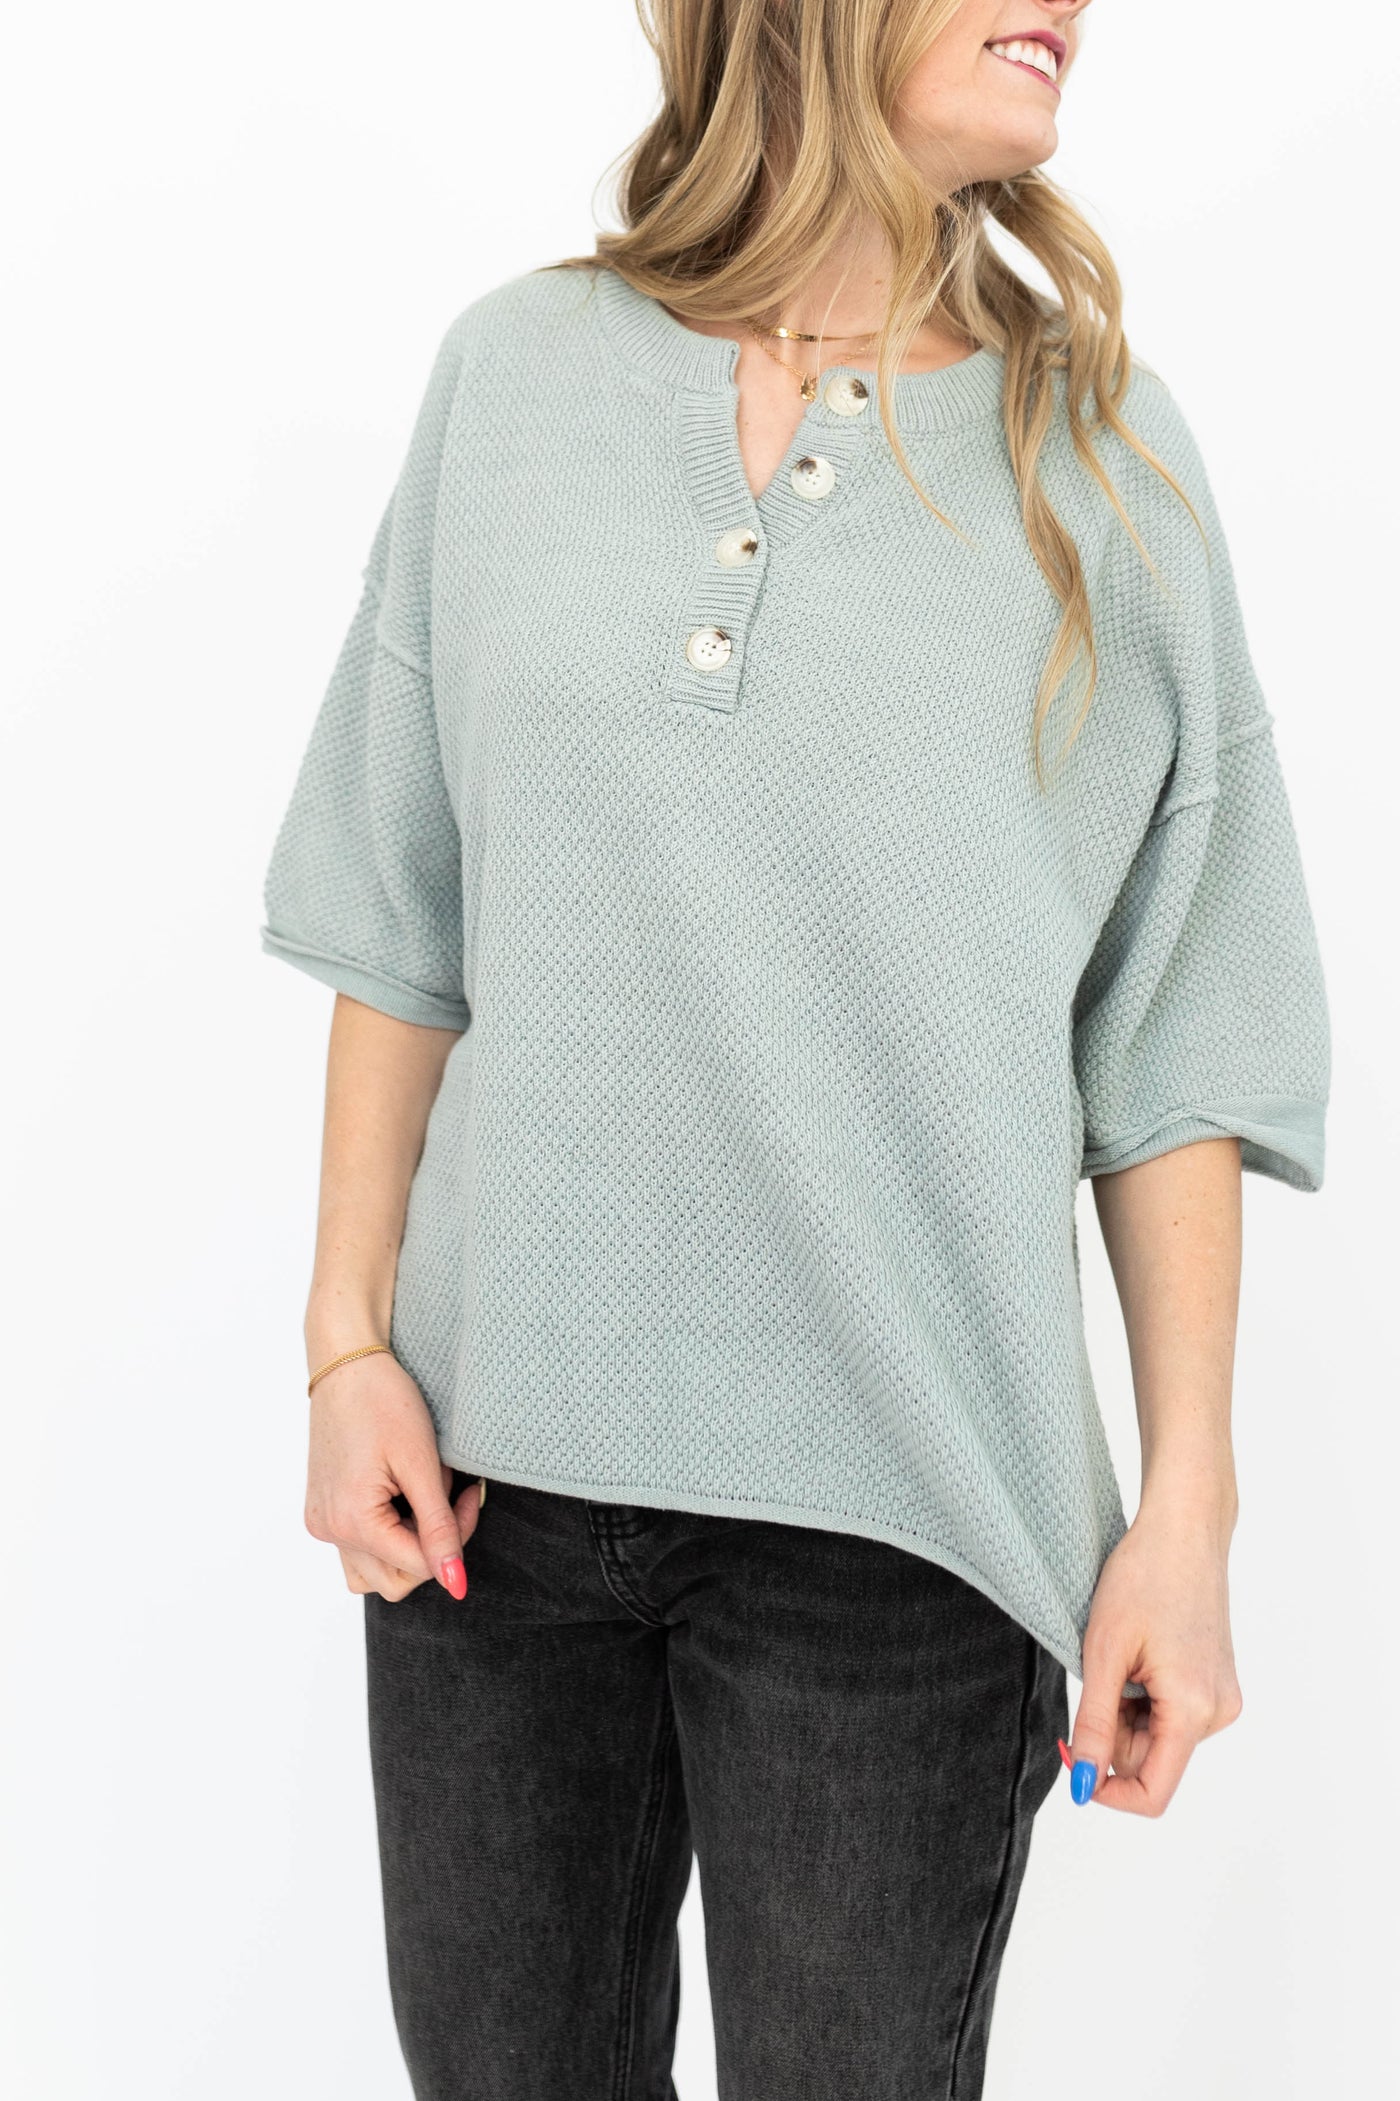 Dusty sage top with short sleeves and buttons at the neck